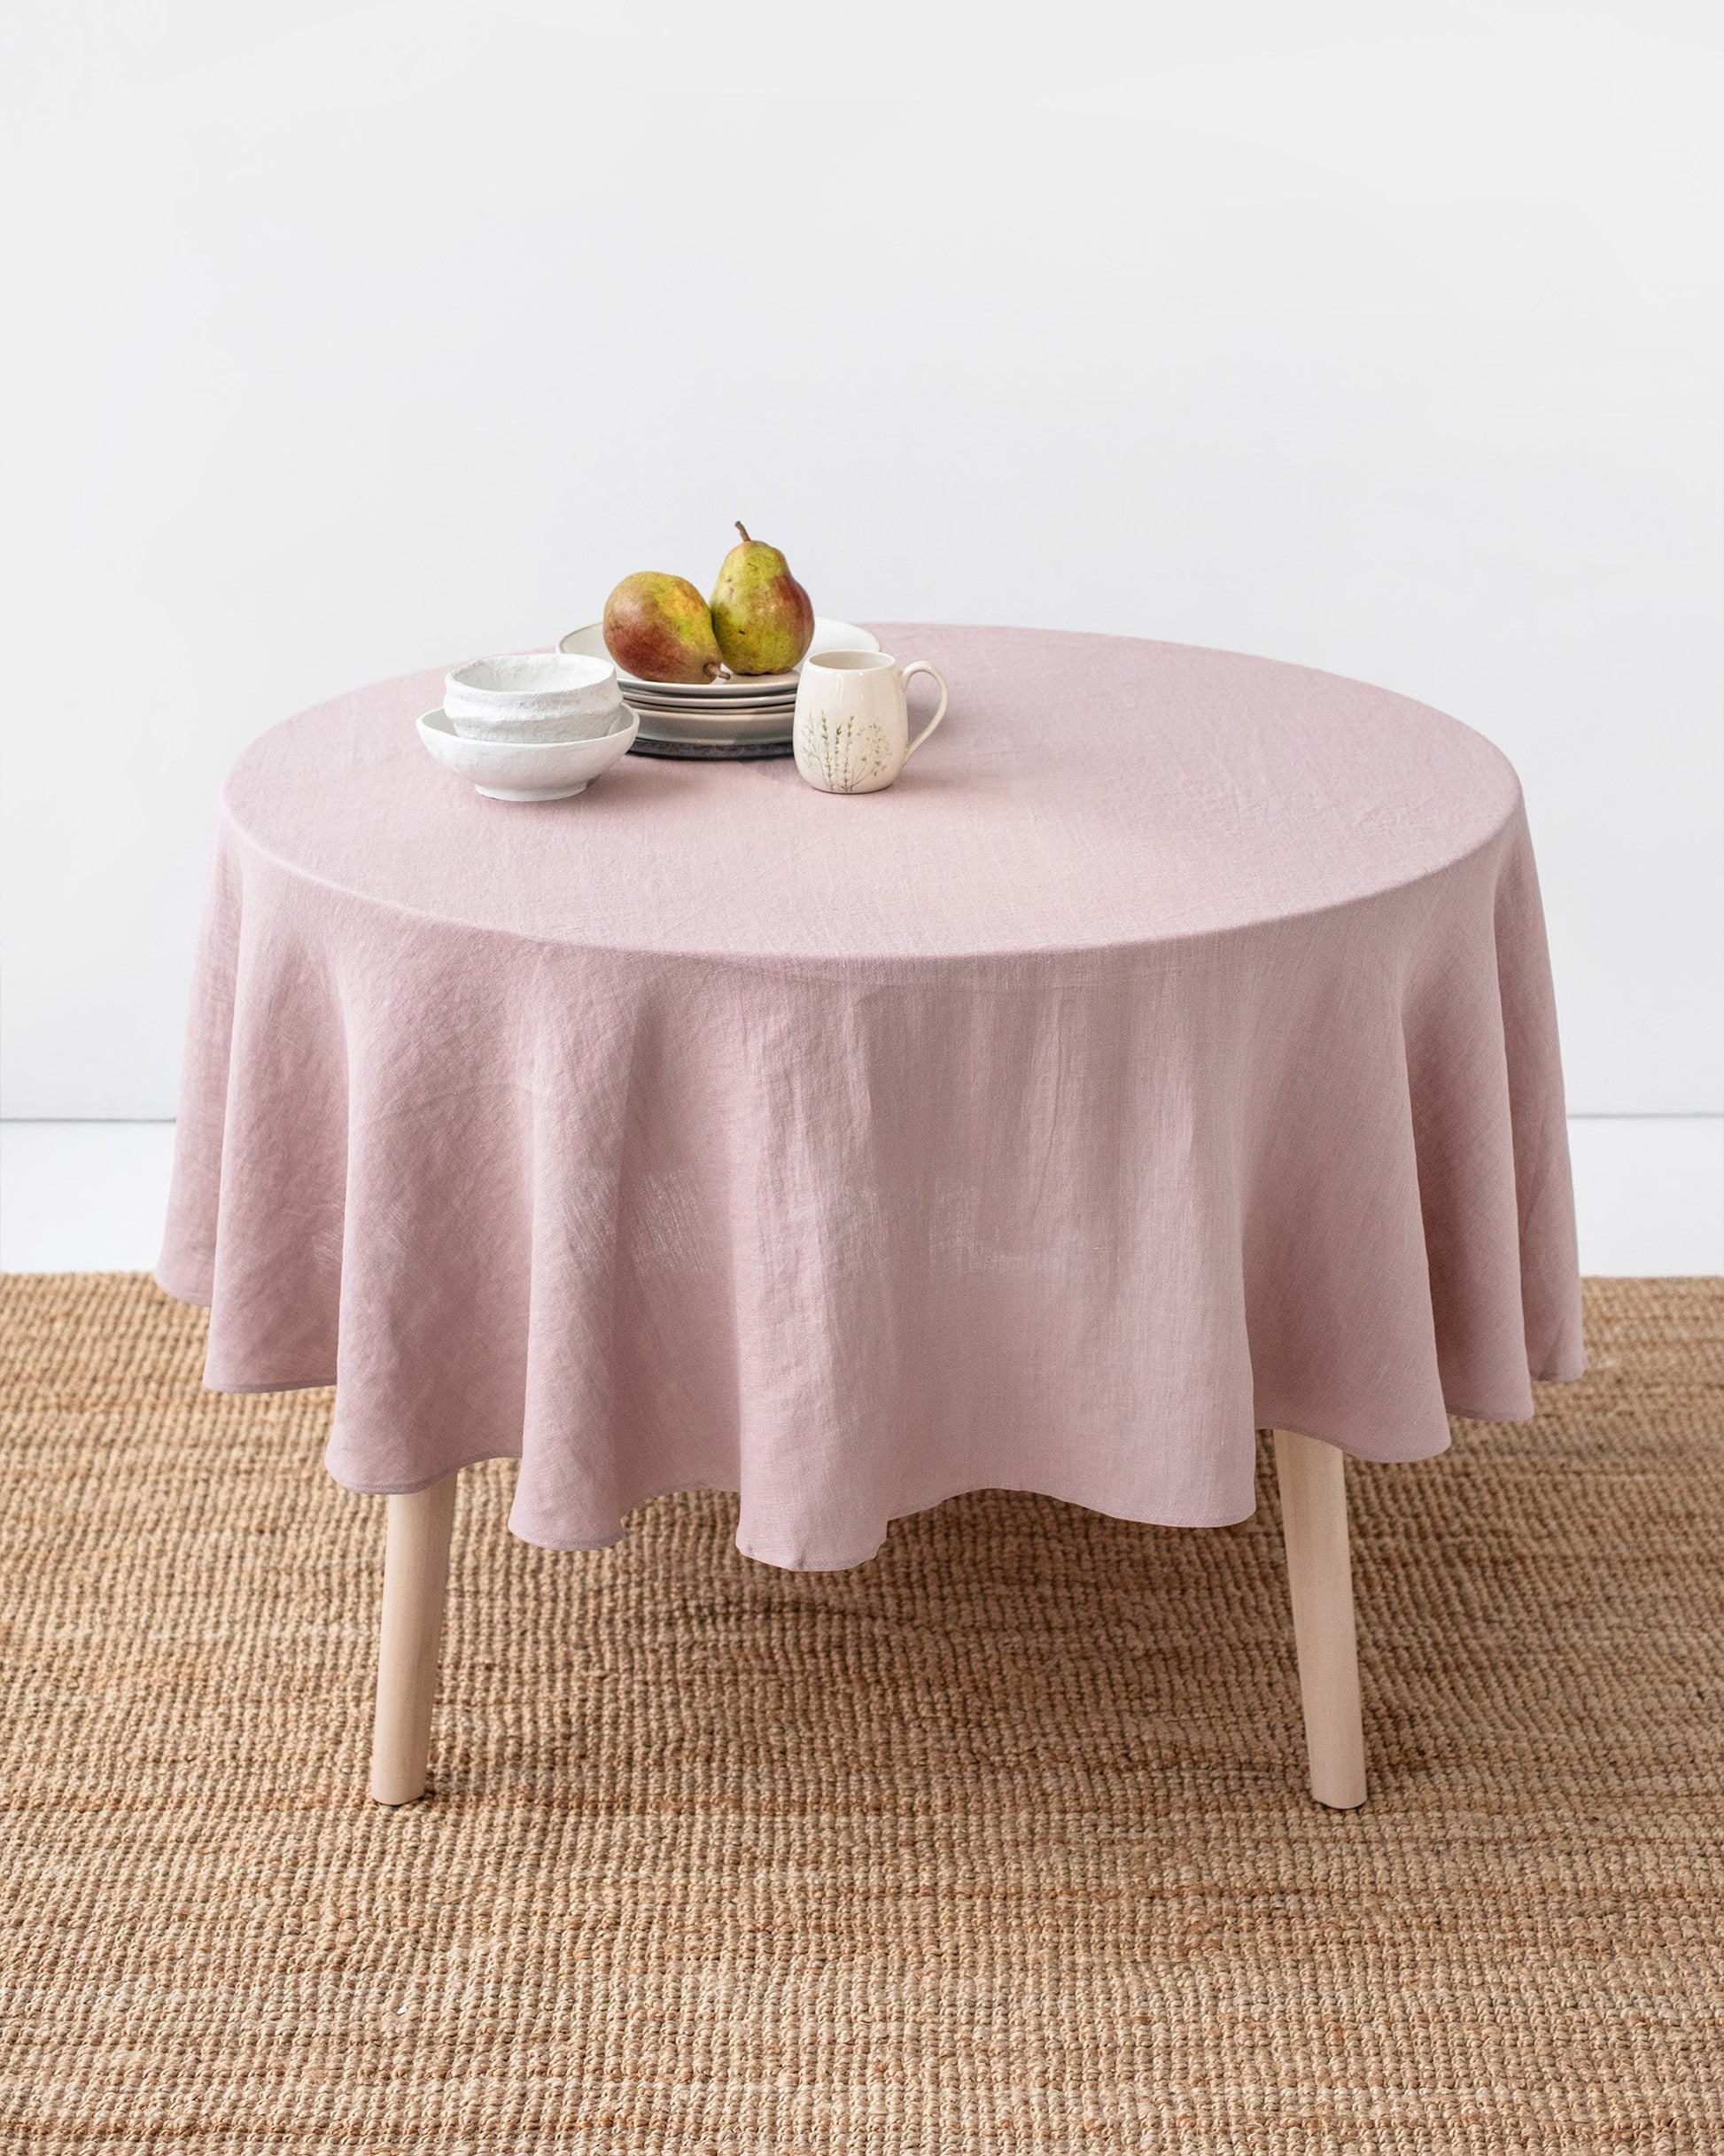 Custom size round linen tablecloth in Woodrose - MagicLinen